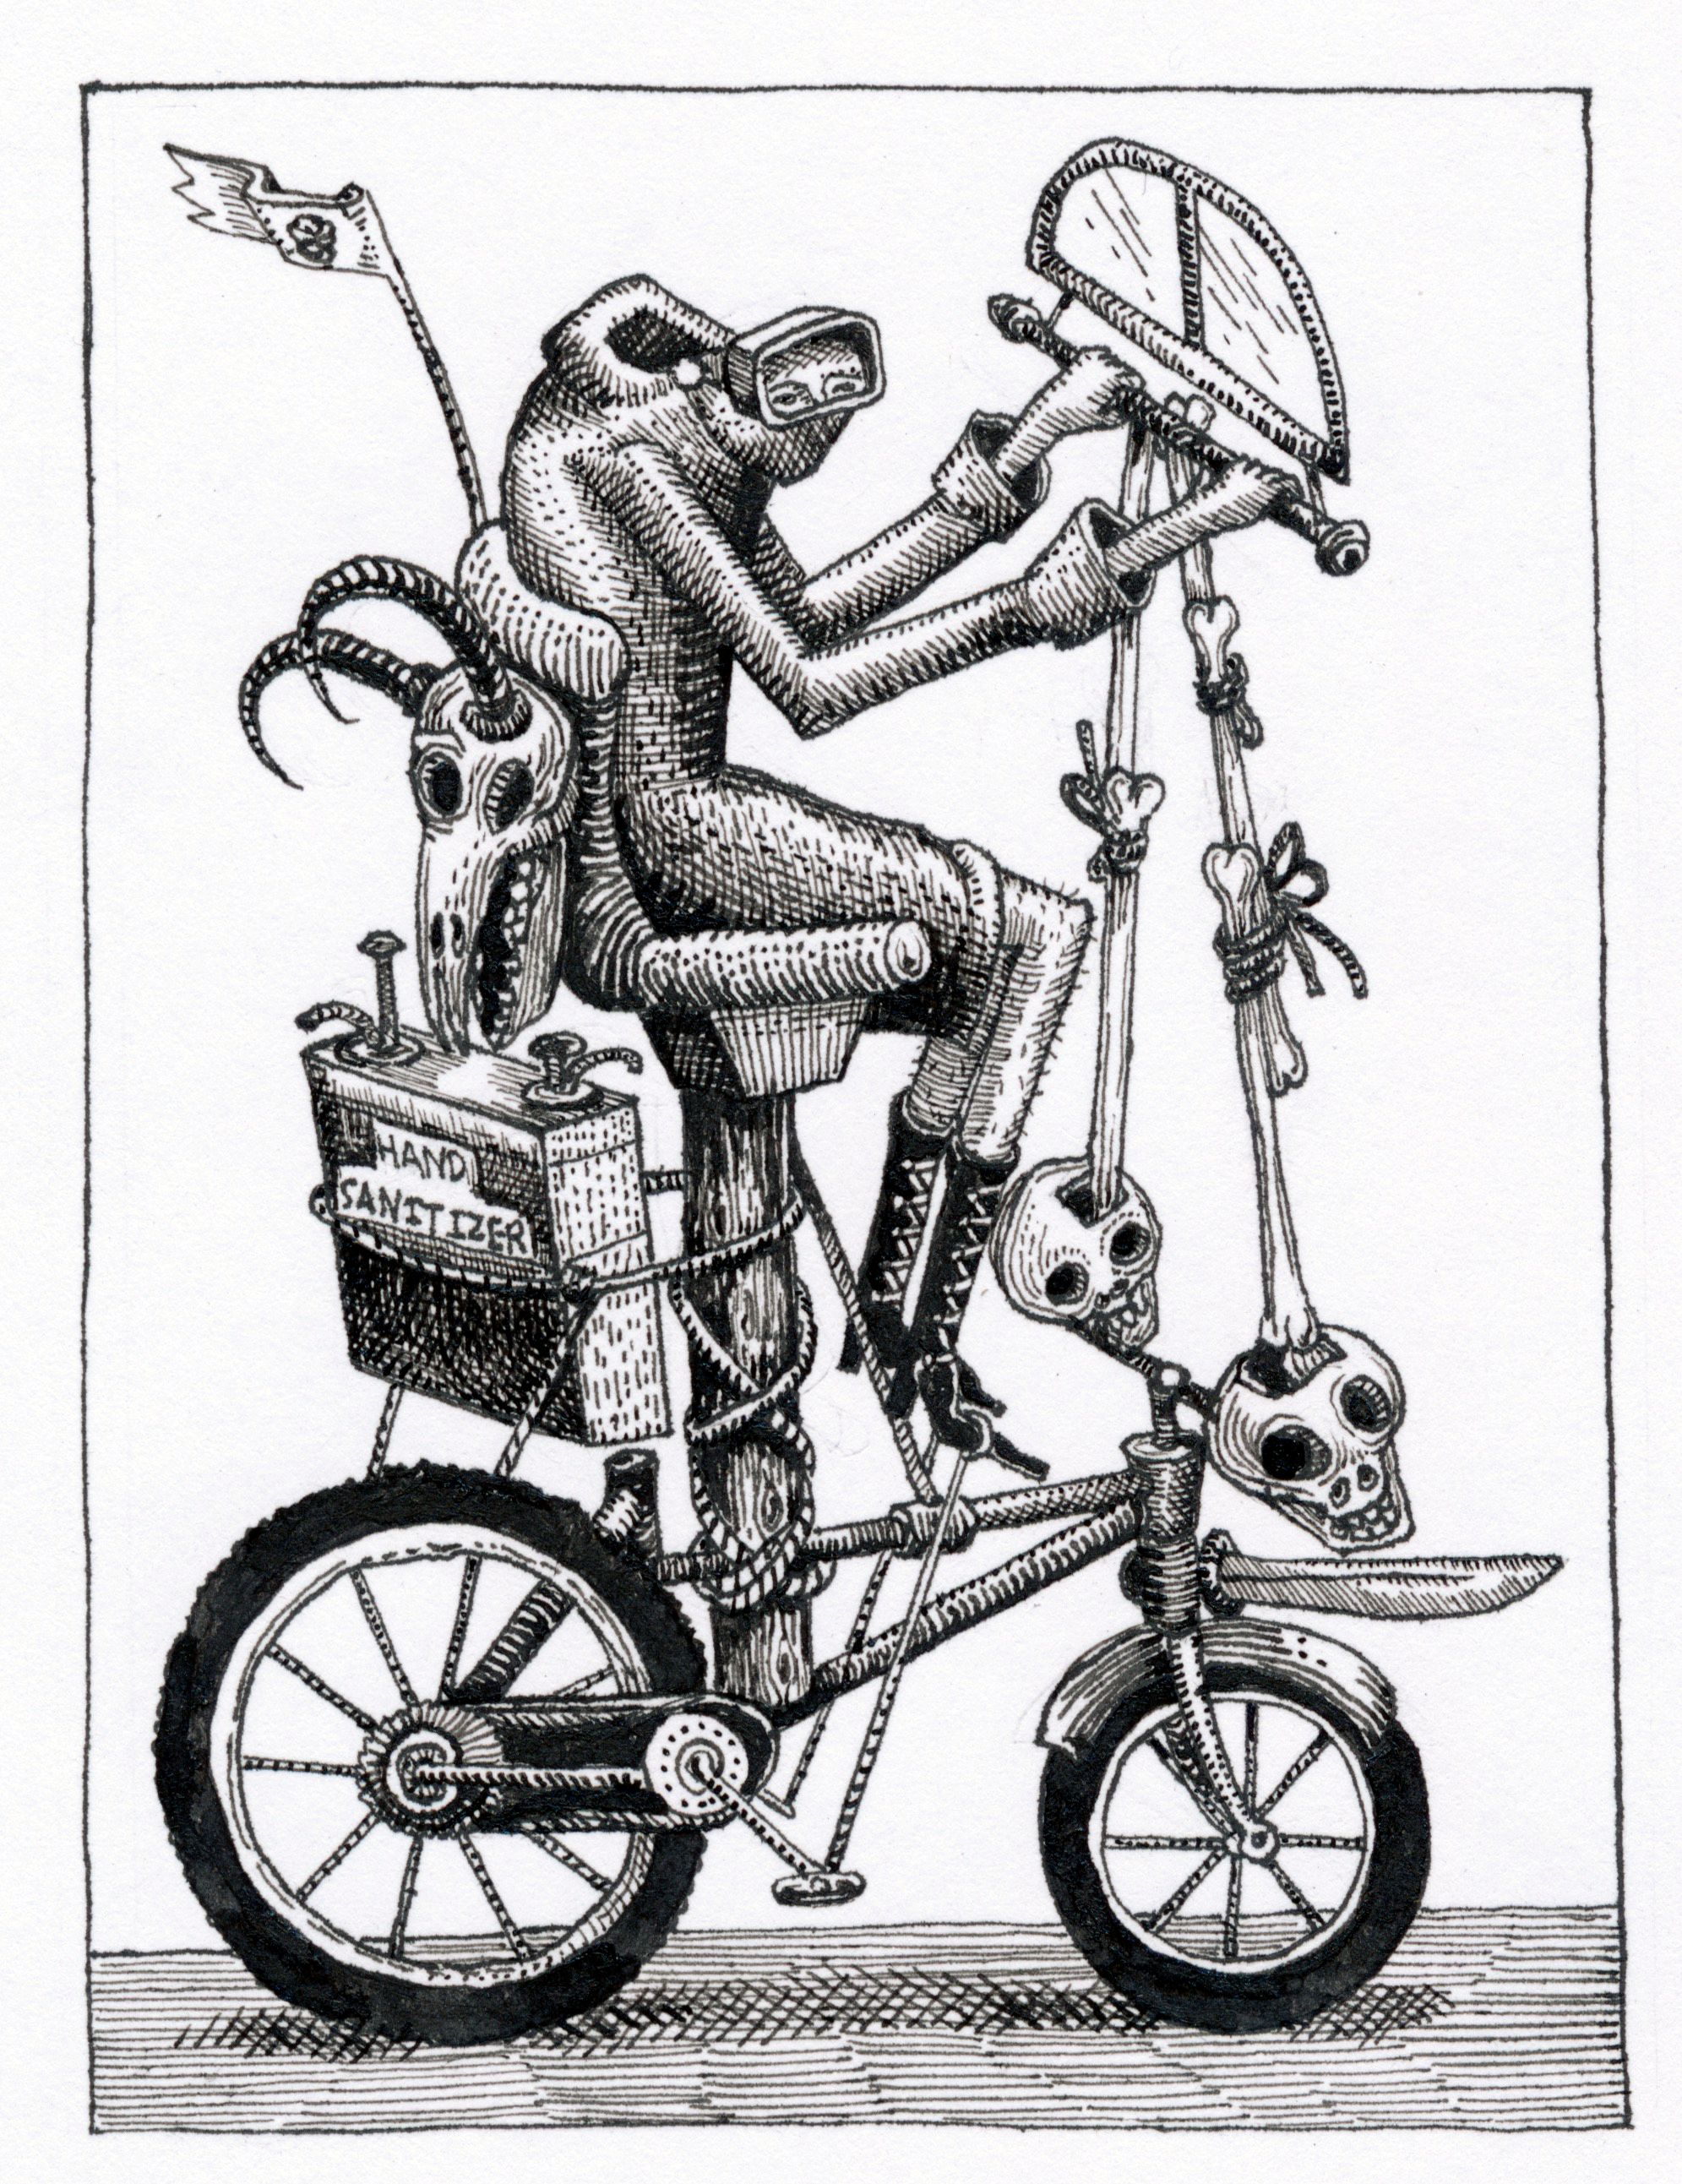 A pen and ink drawing of a human-like figure riding a modified bicycle with a box which has "hand sanitiser" printed on it. 